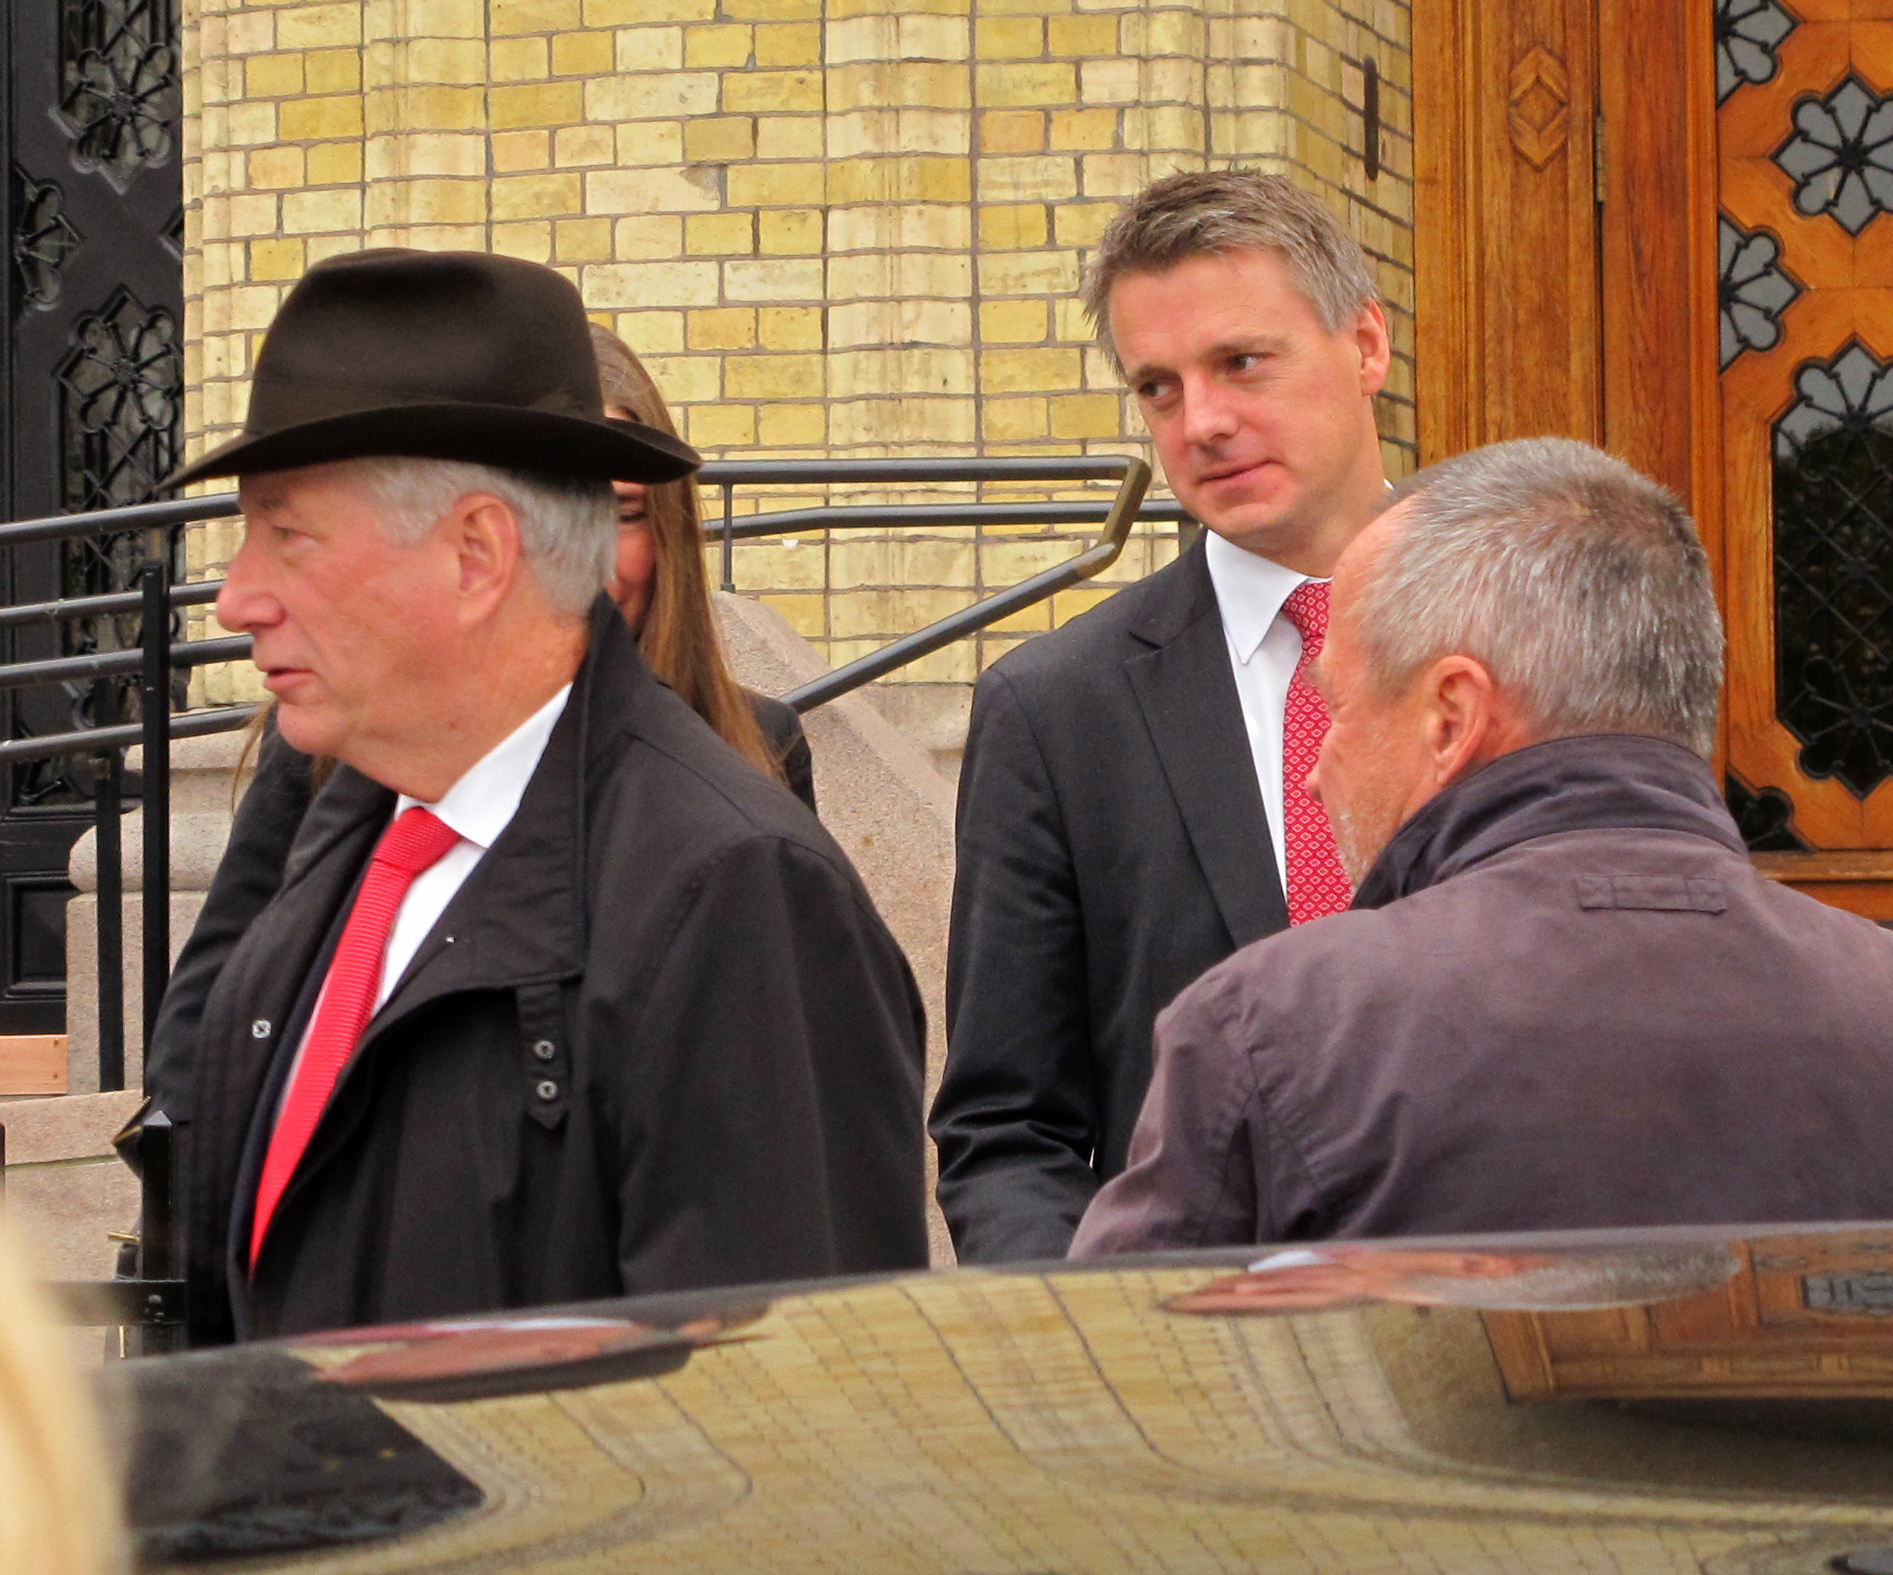 three men in suits, ties and hats outside